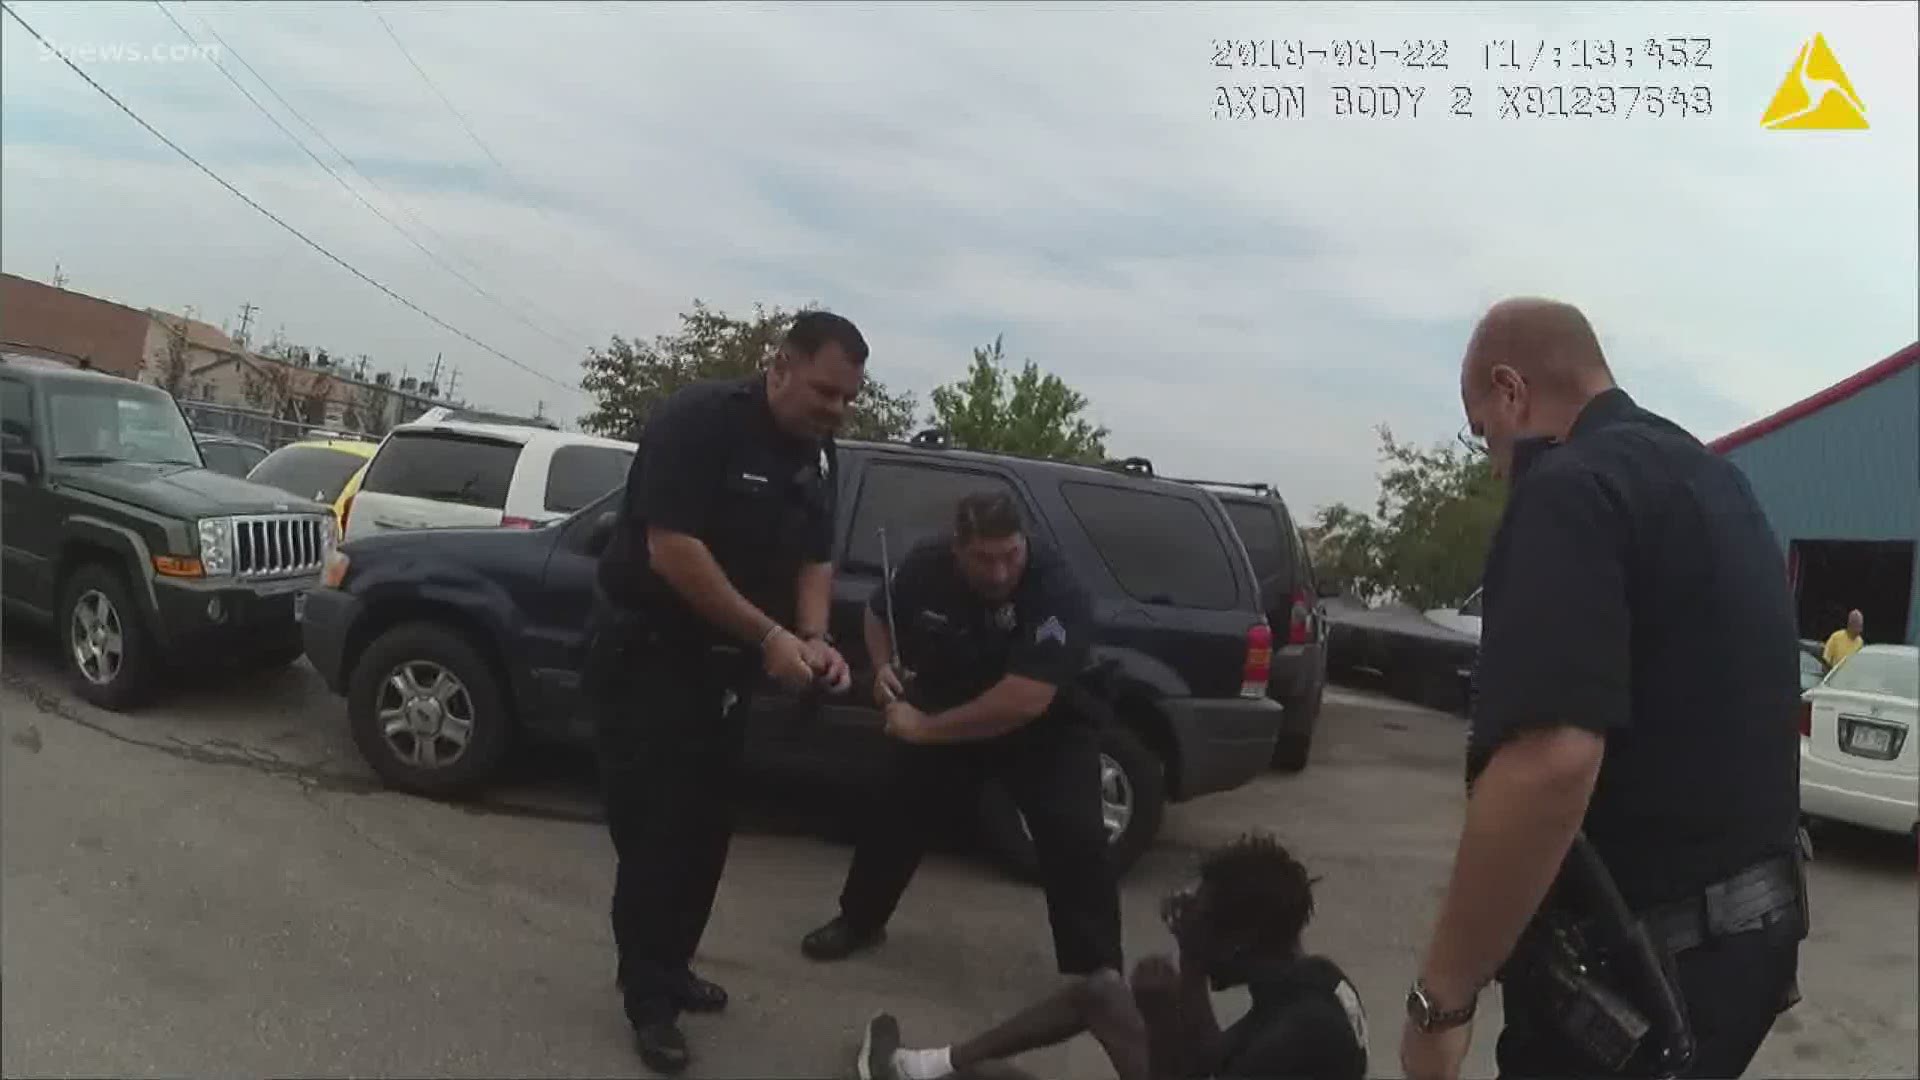 The lawsuit claims the officer violates department policies by hitting him in the face and neck.